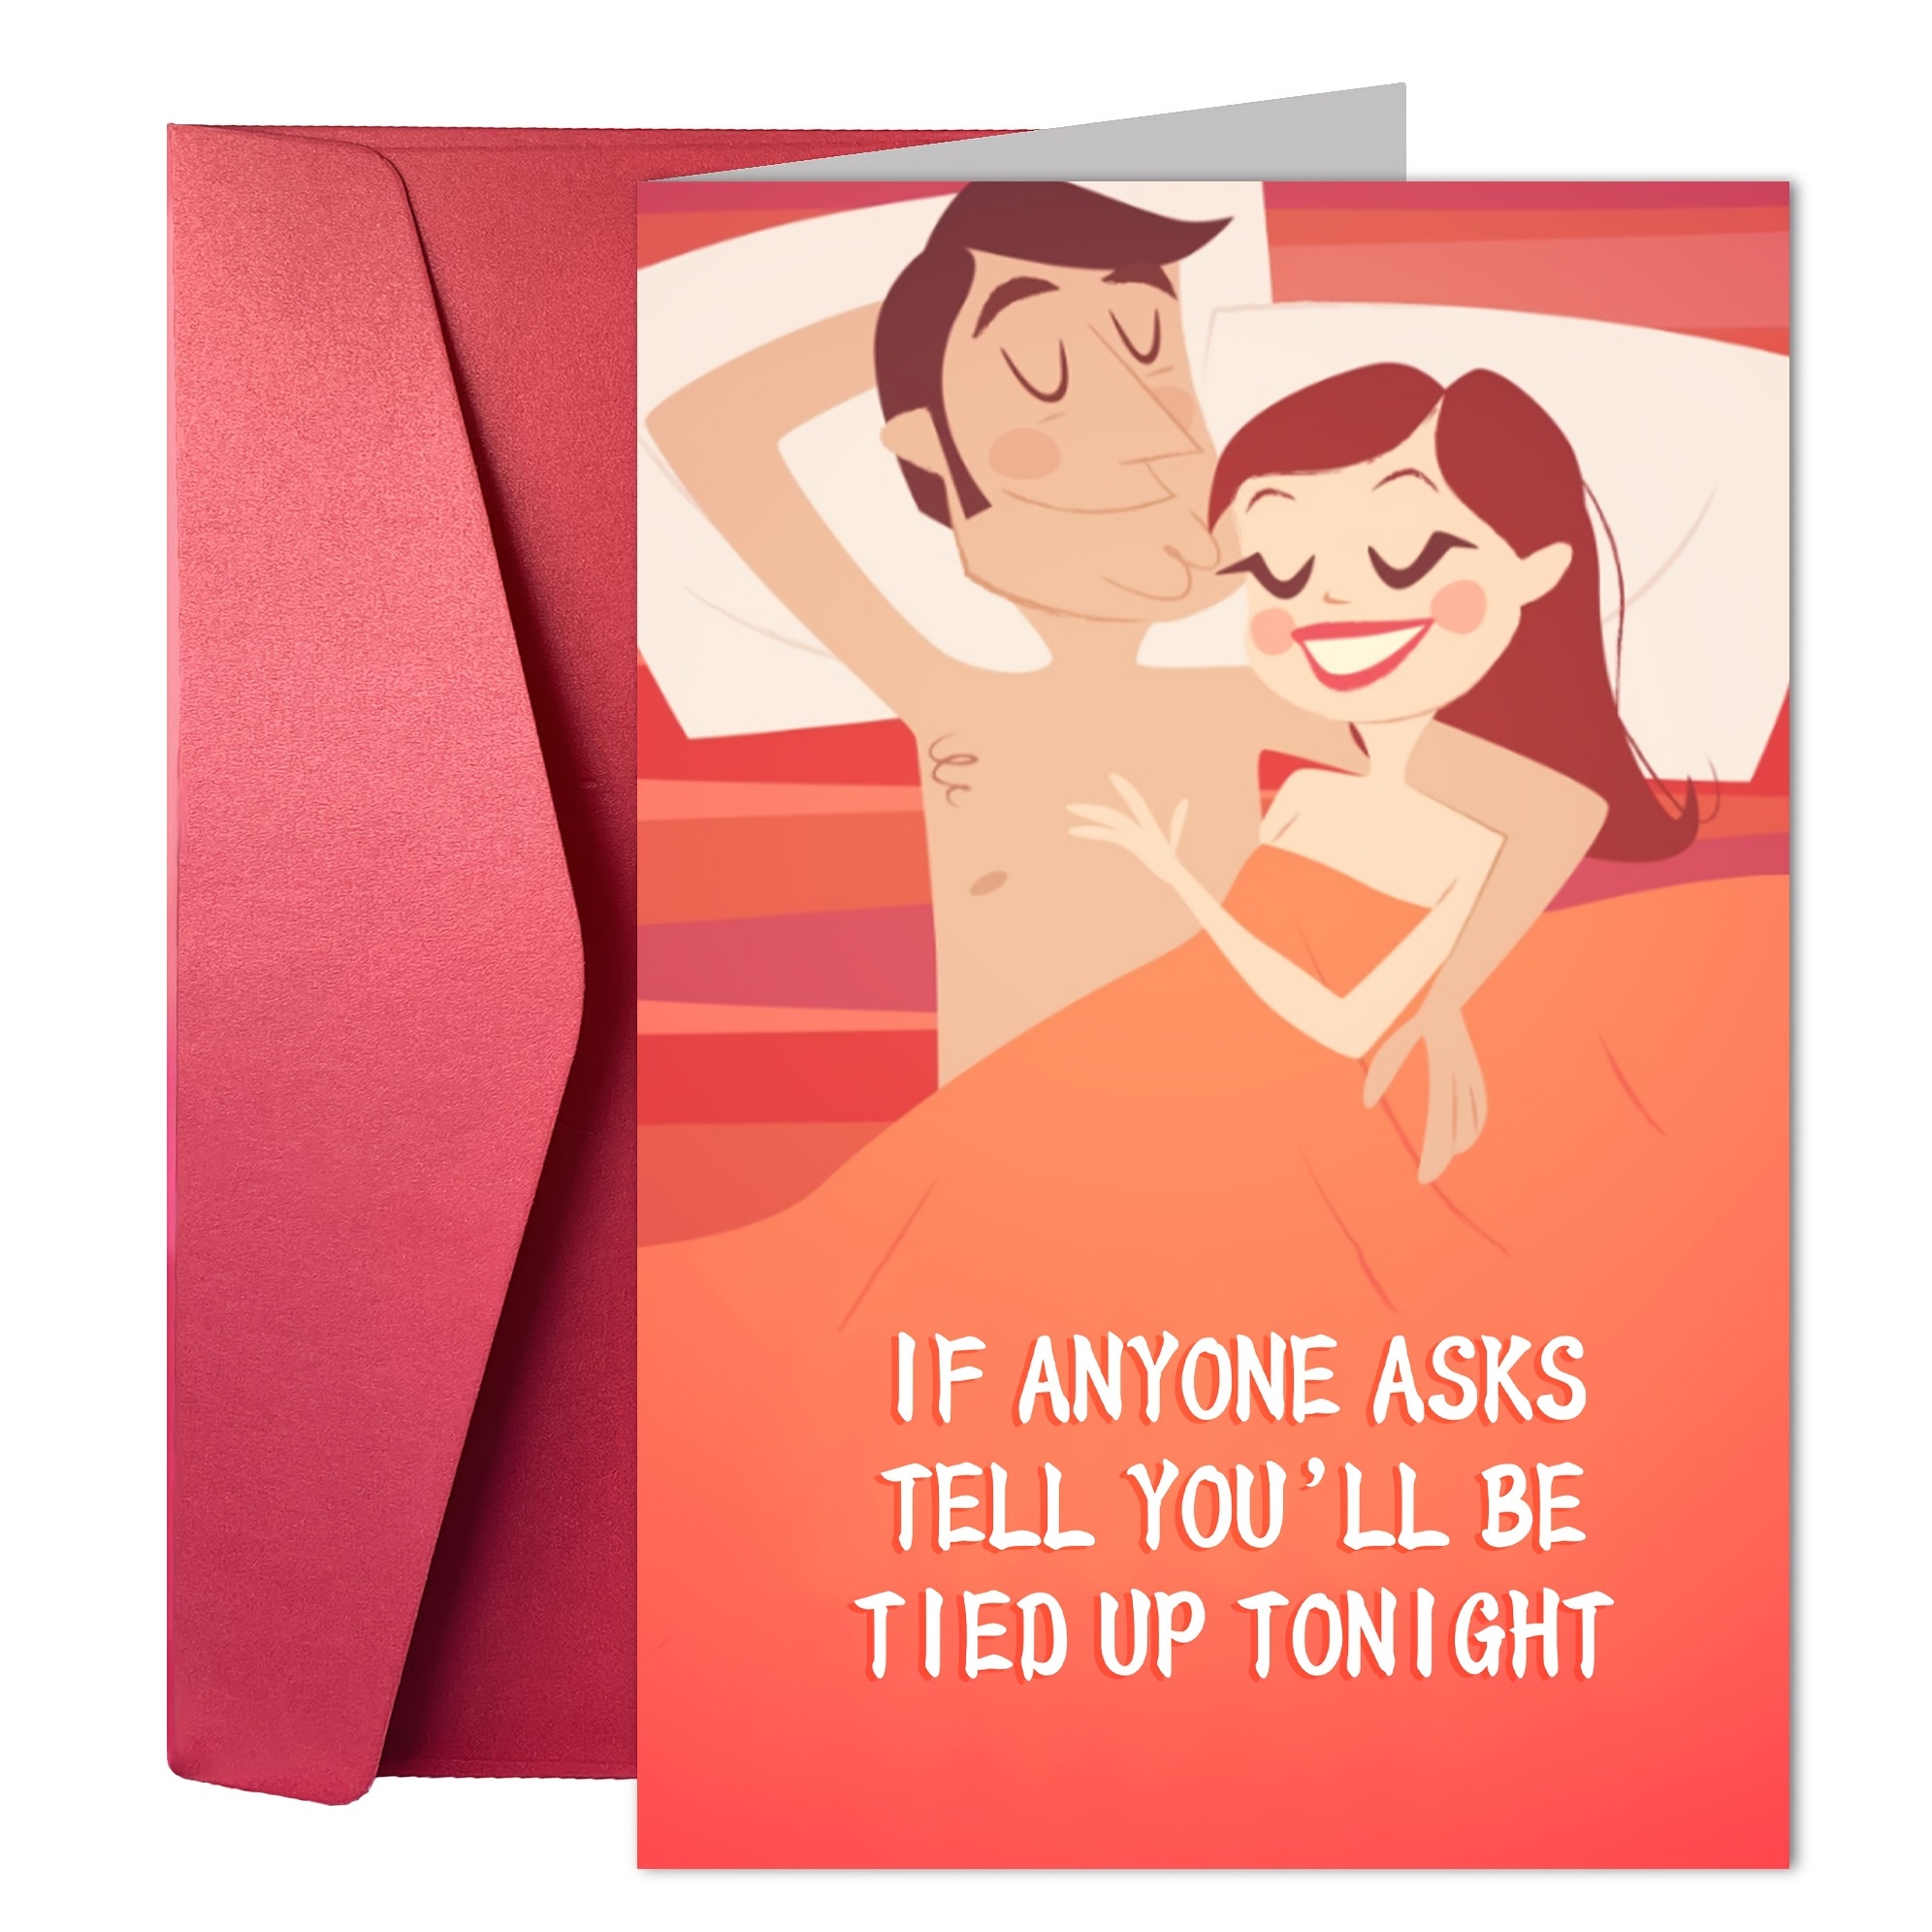 Romantic Anniversary Card For Him/her - Tied Up Tonight - Funny Gift Birthday Cards For Husband/wife/man/woman/boyfriend/girlfriend